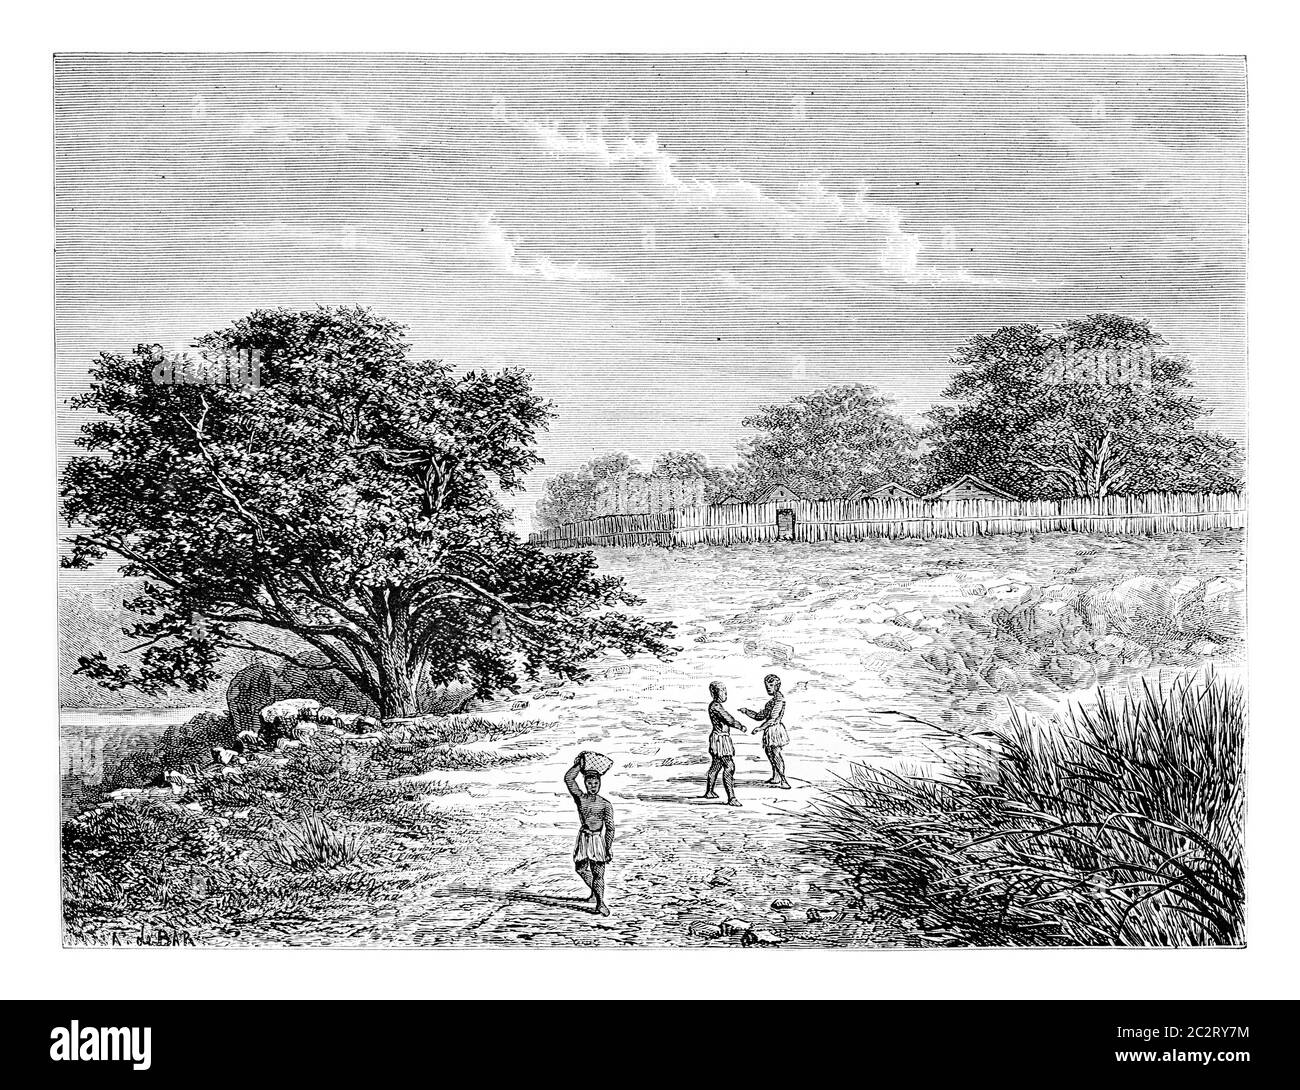 Belmonte Enclosure in Angola, Southern Africa, drawing by De Bar based on a sketch by Serpa Pinto, vintage engraved illustration. Le Tour du Monde, Tr Stock Photo